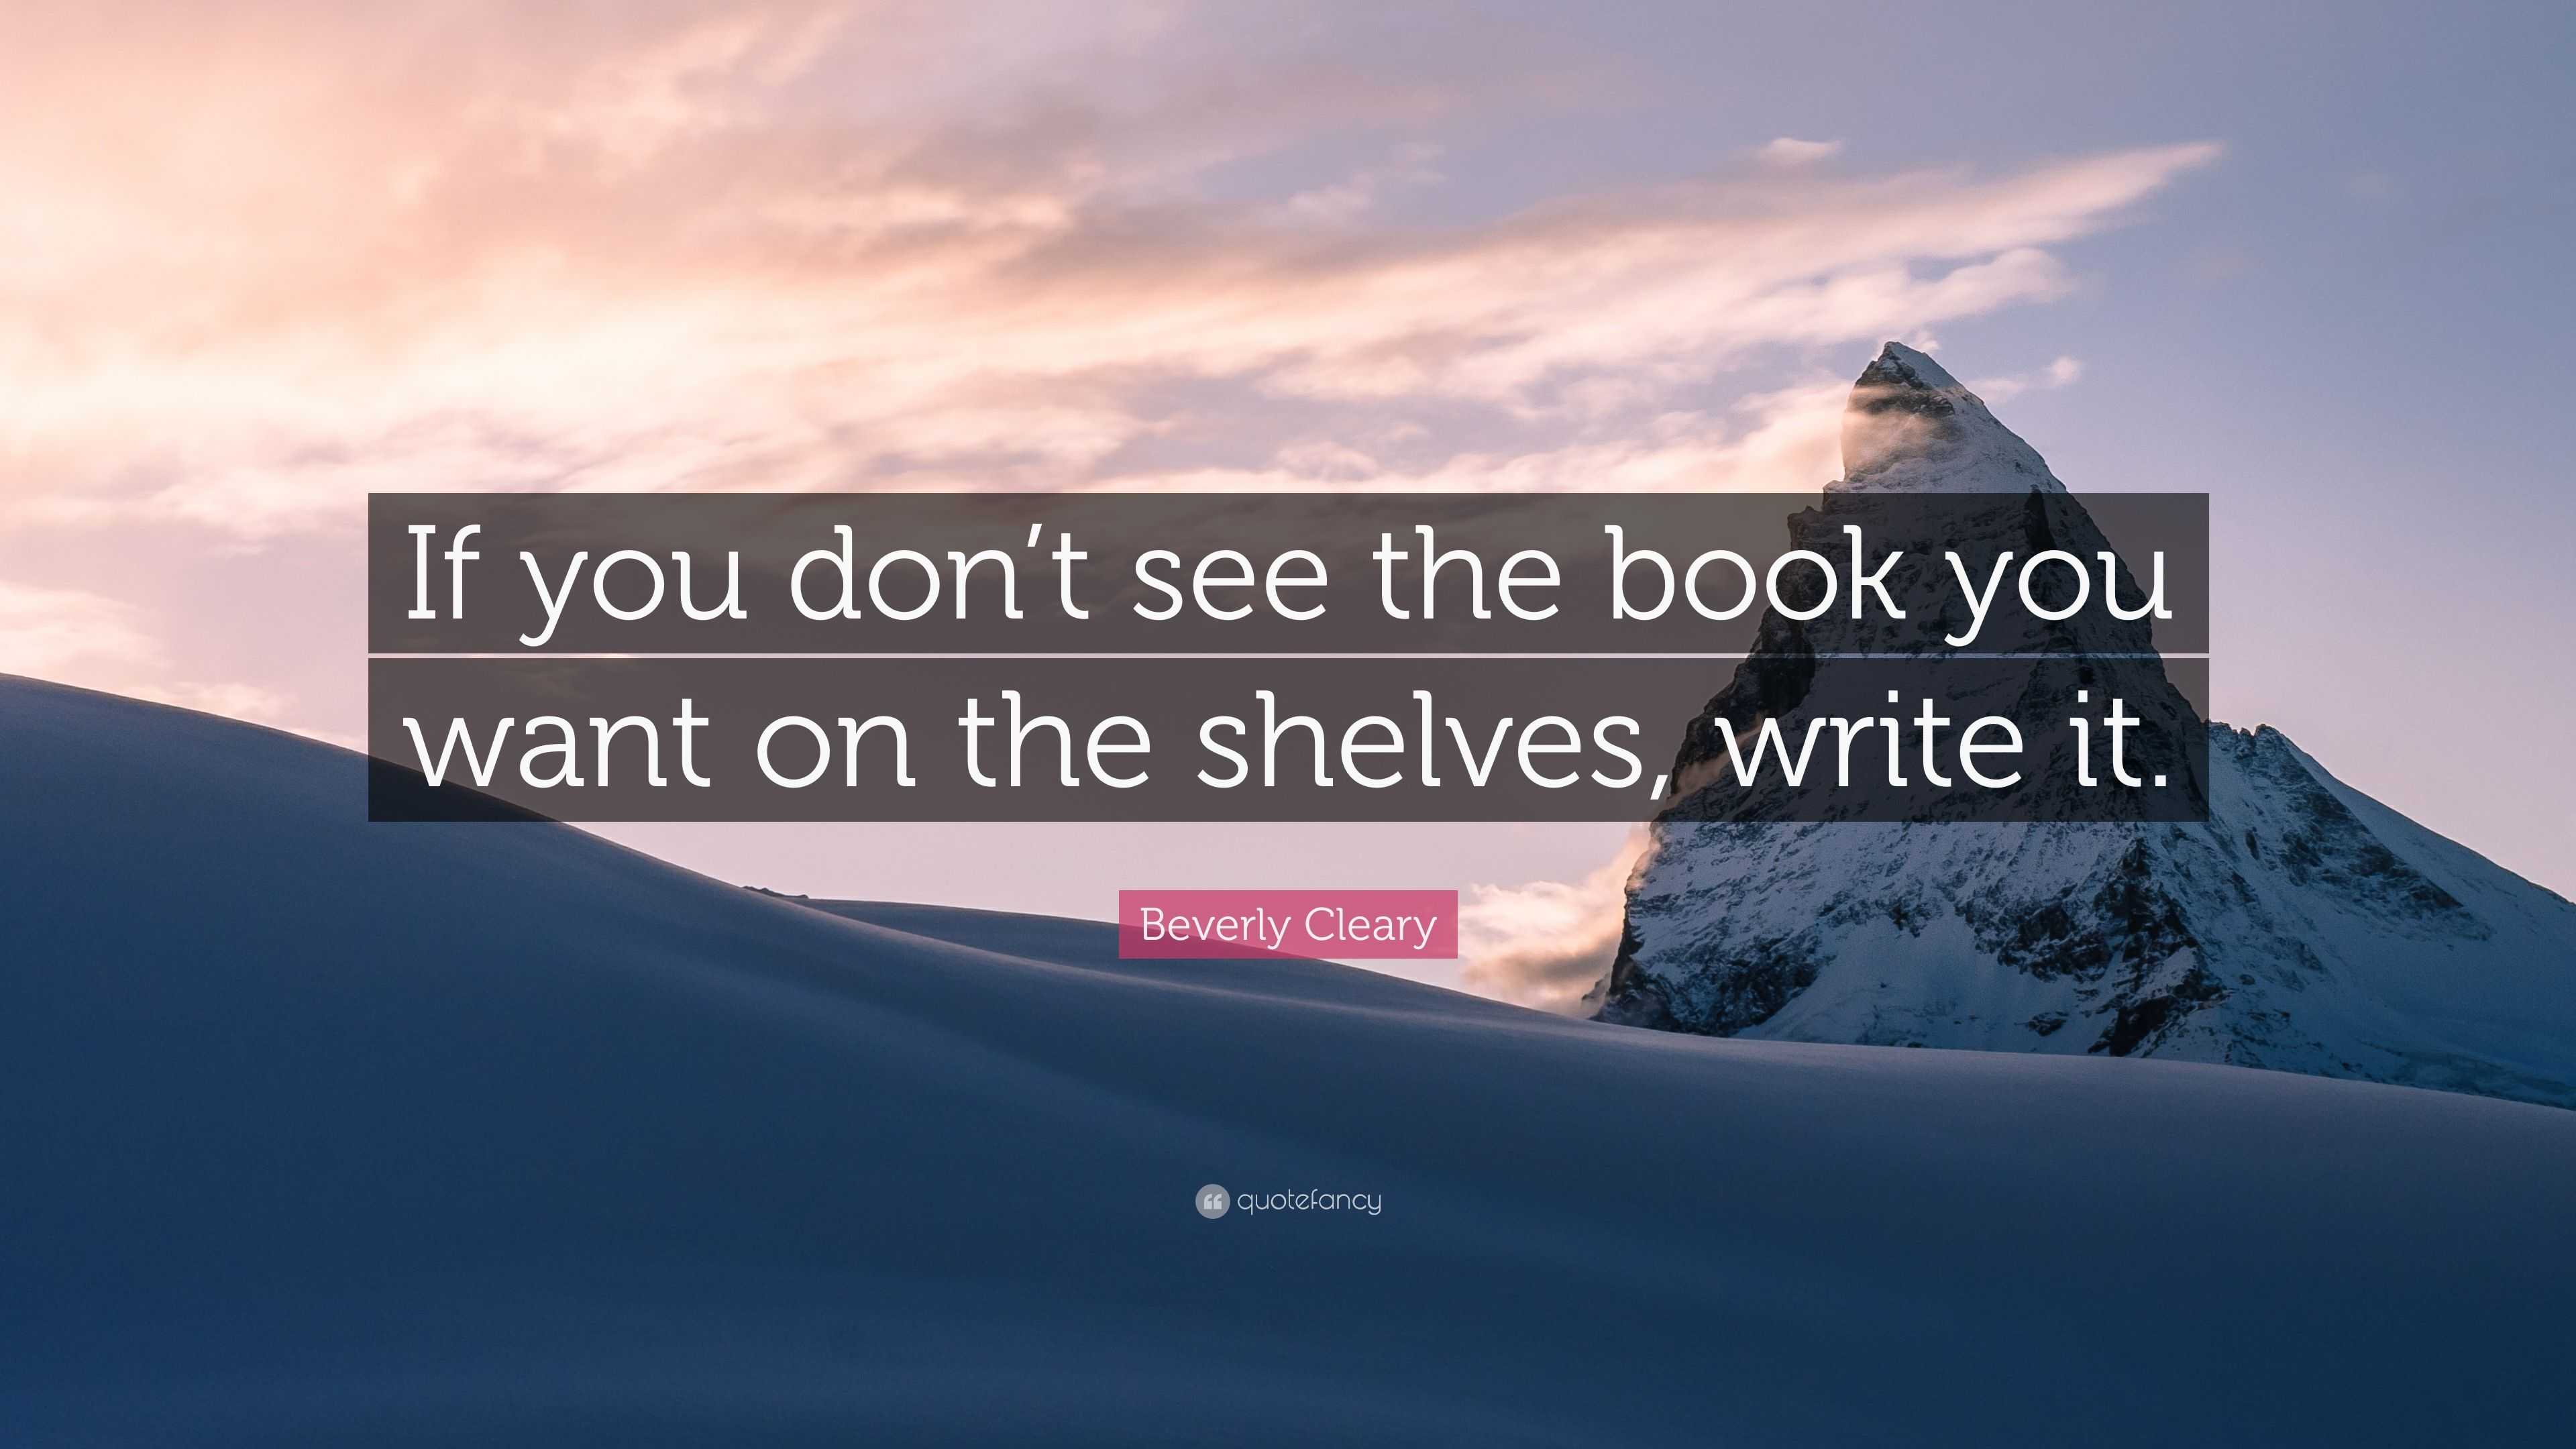 Beverly Cleary Quote: “If you don’t see the book you want on the ...